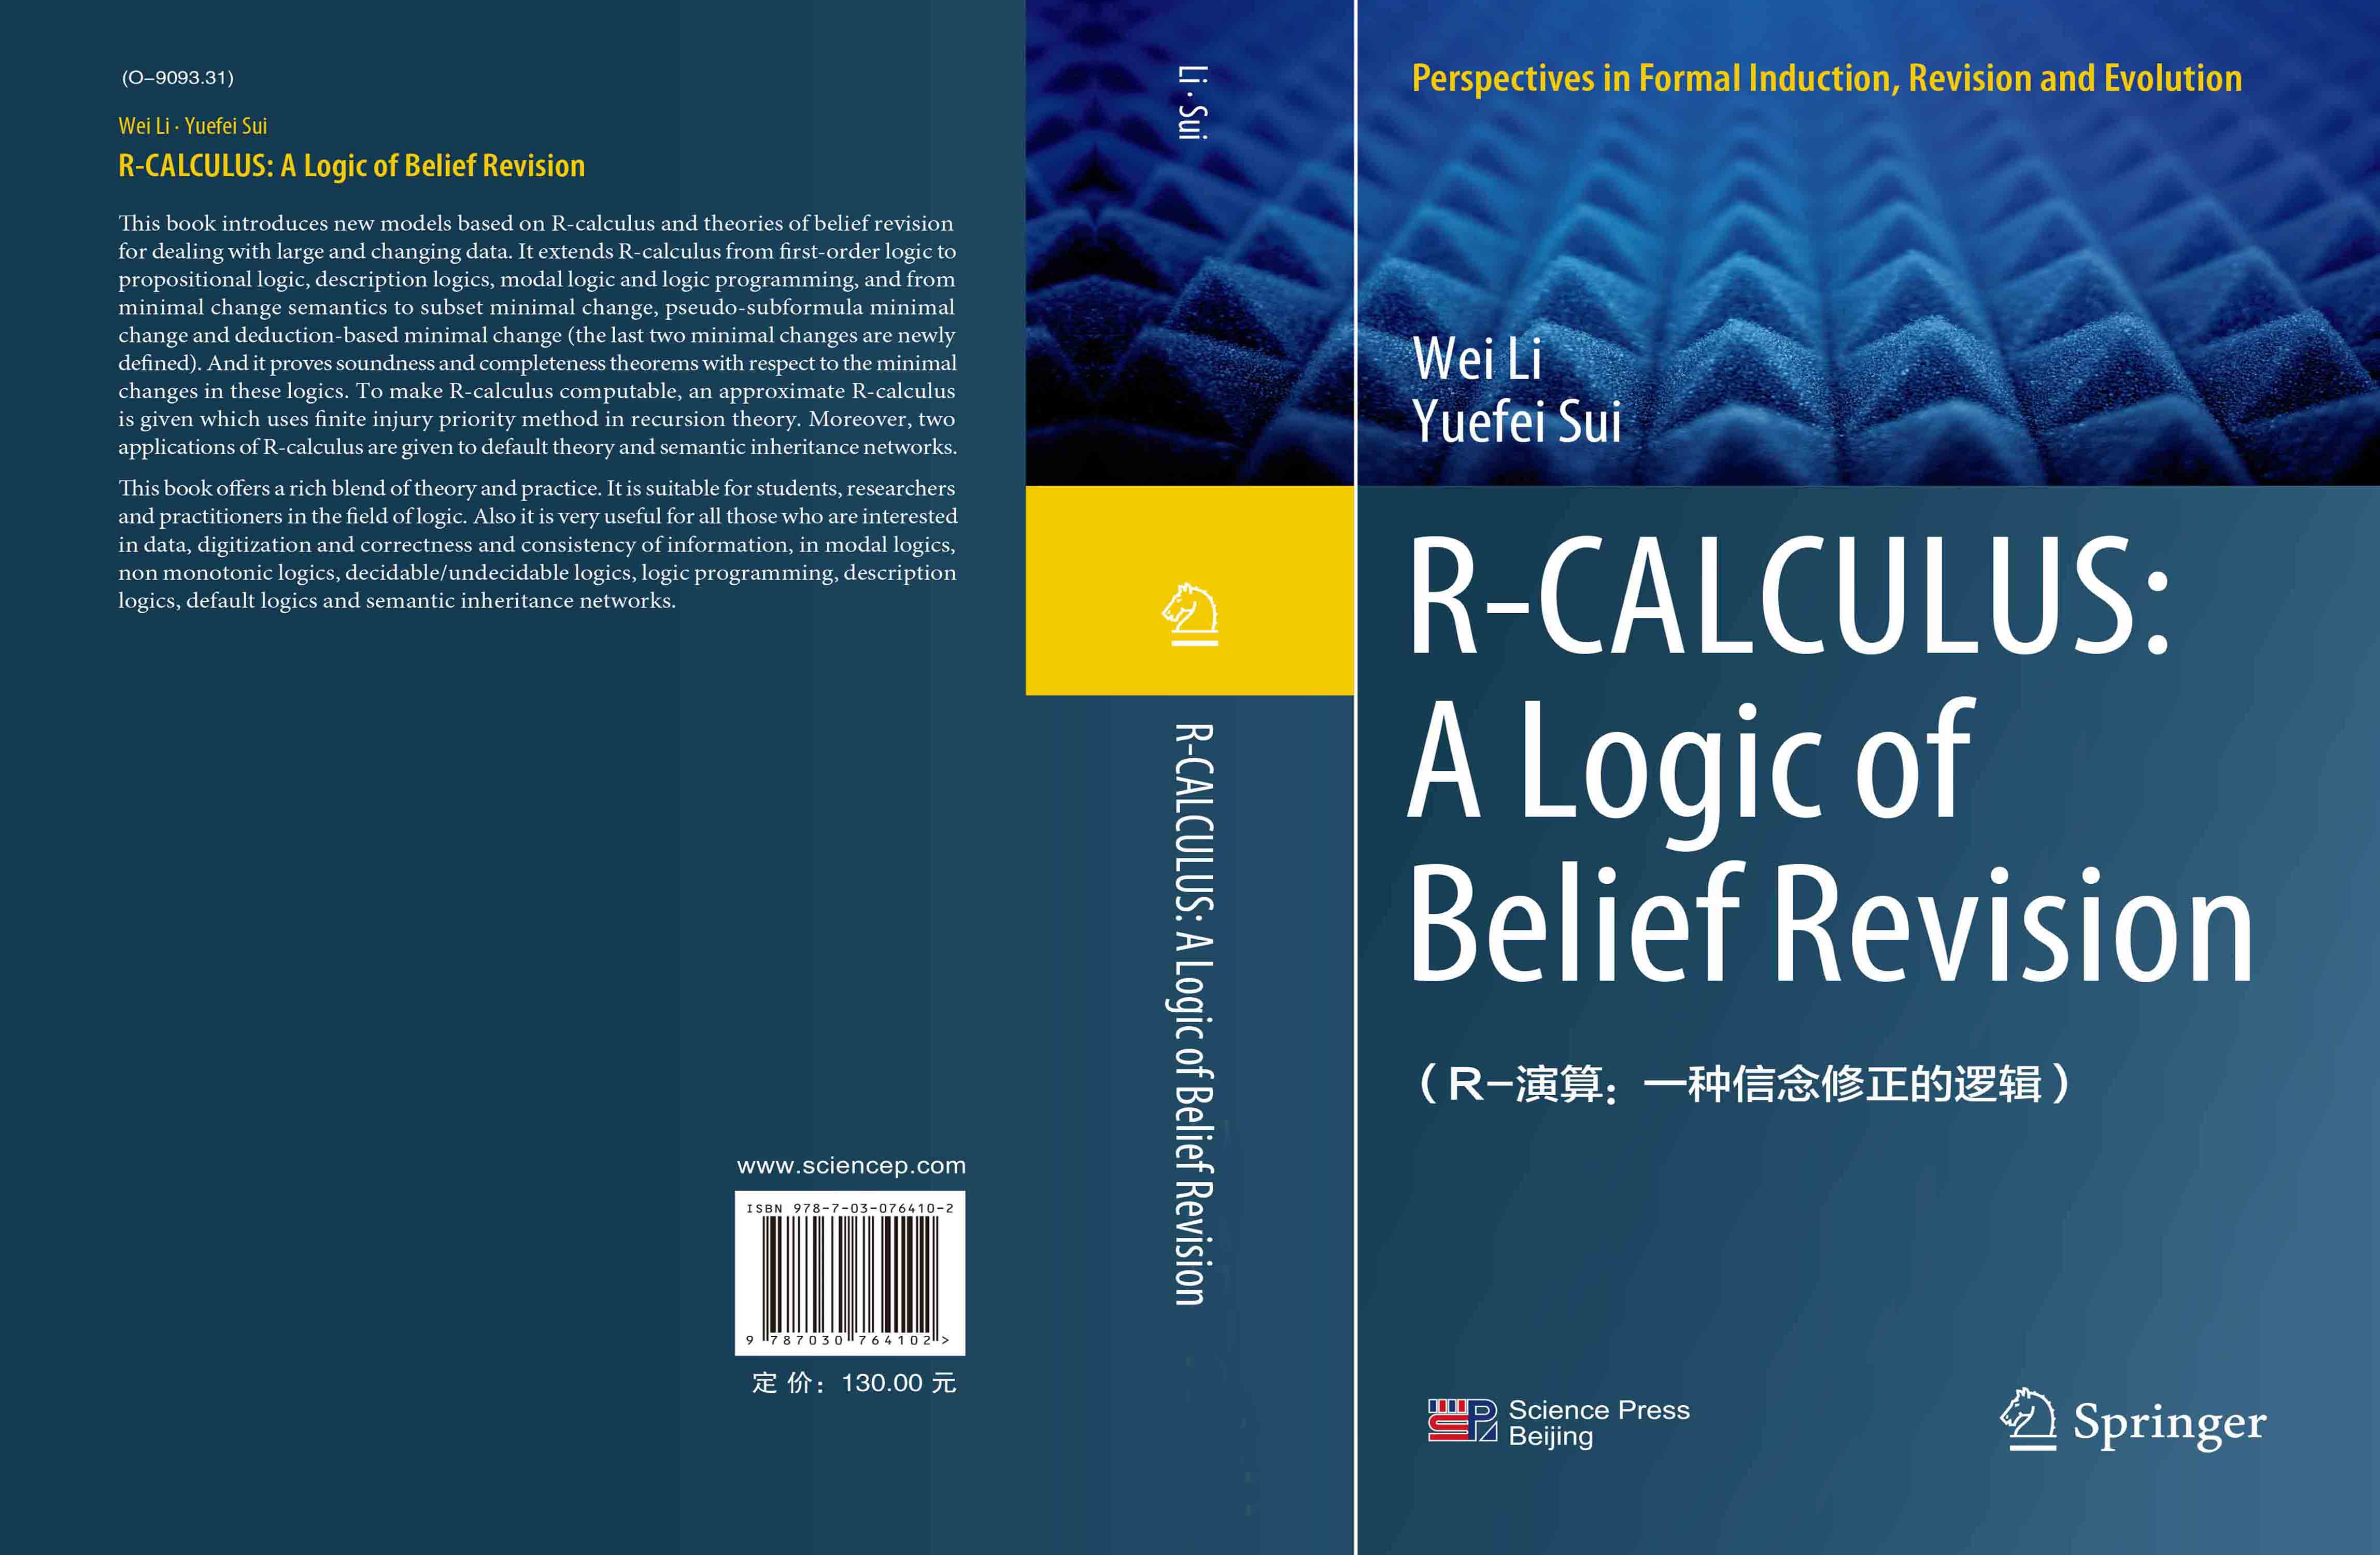 R-CALCULUS:A Logic of Belief Revision